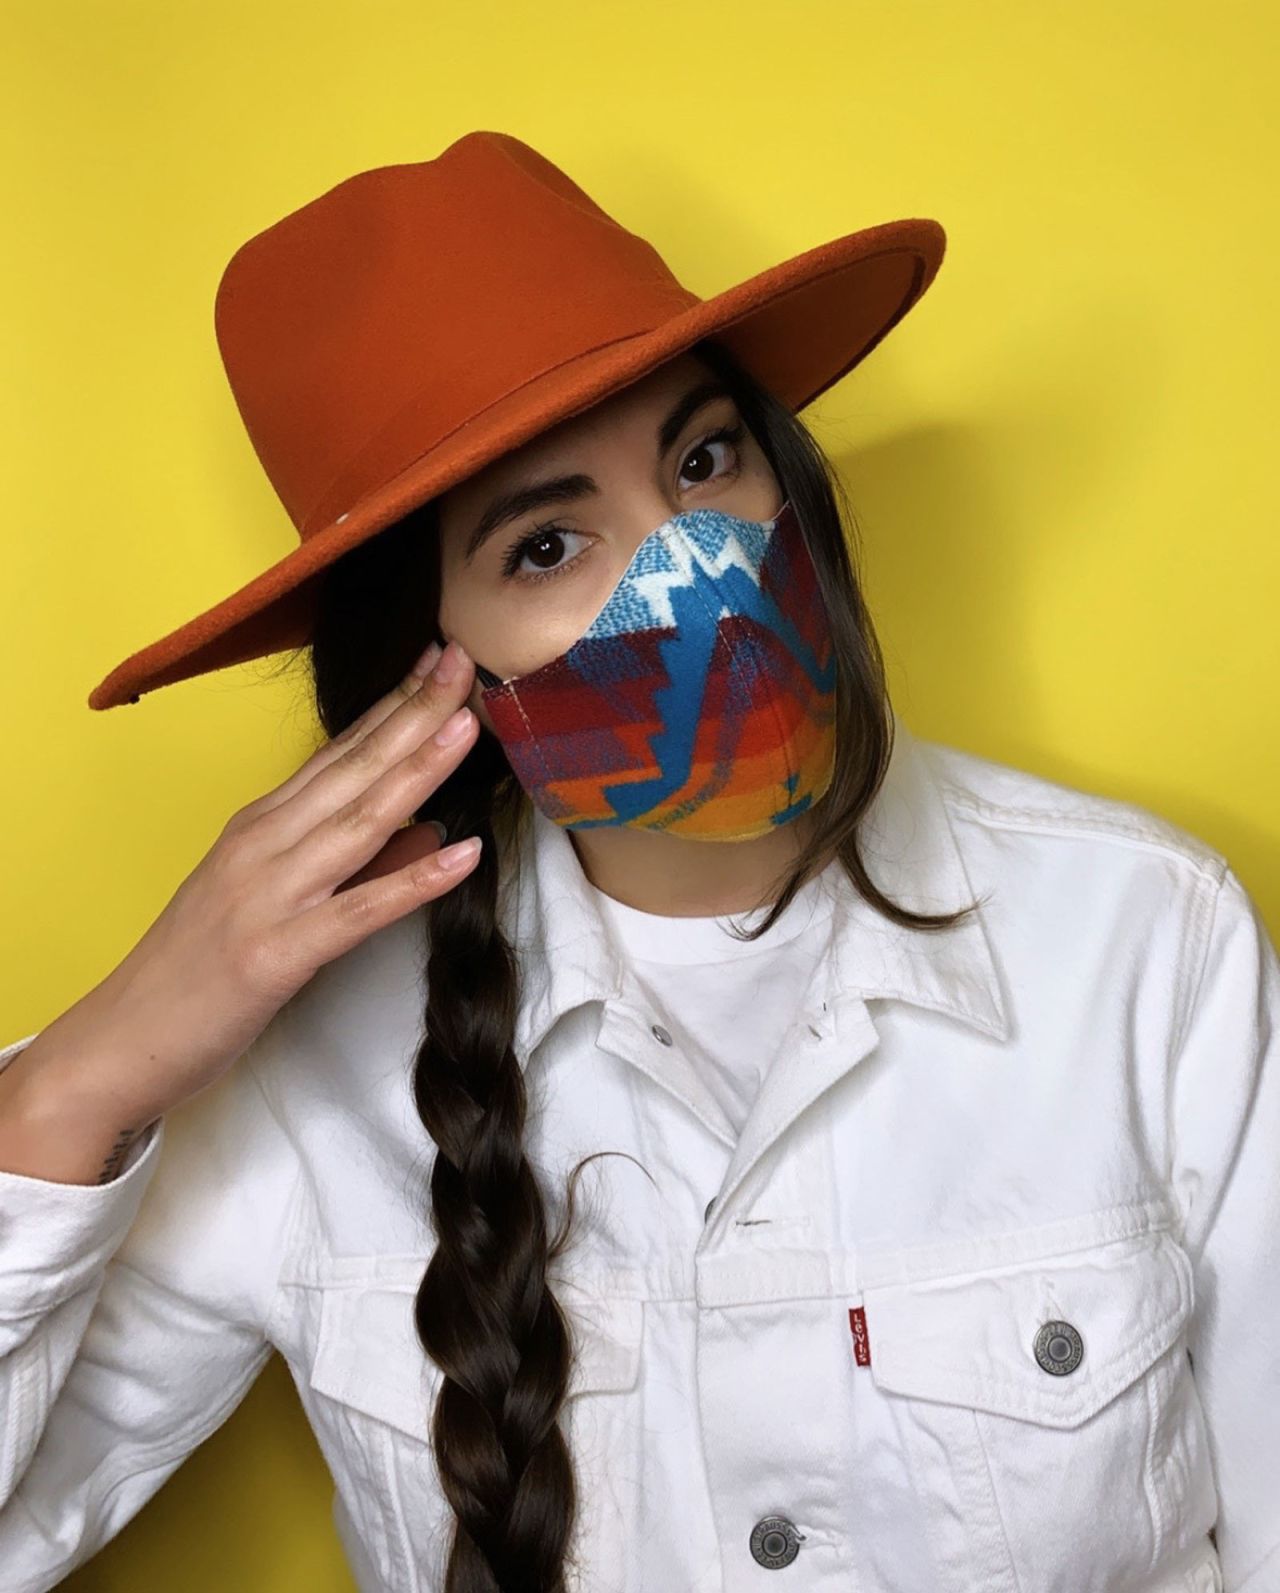 Korina Emmerich, a descendant of the Coast Salish Territory Puyallup Tribe, has been designing unique face masks made out of Pendleton blankets.